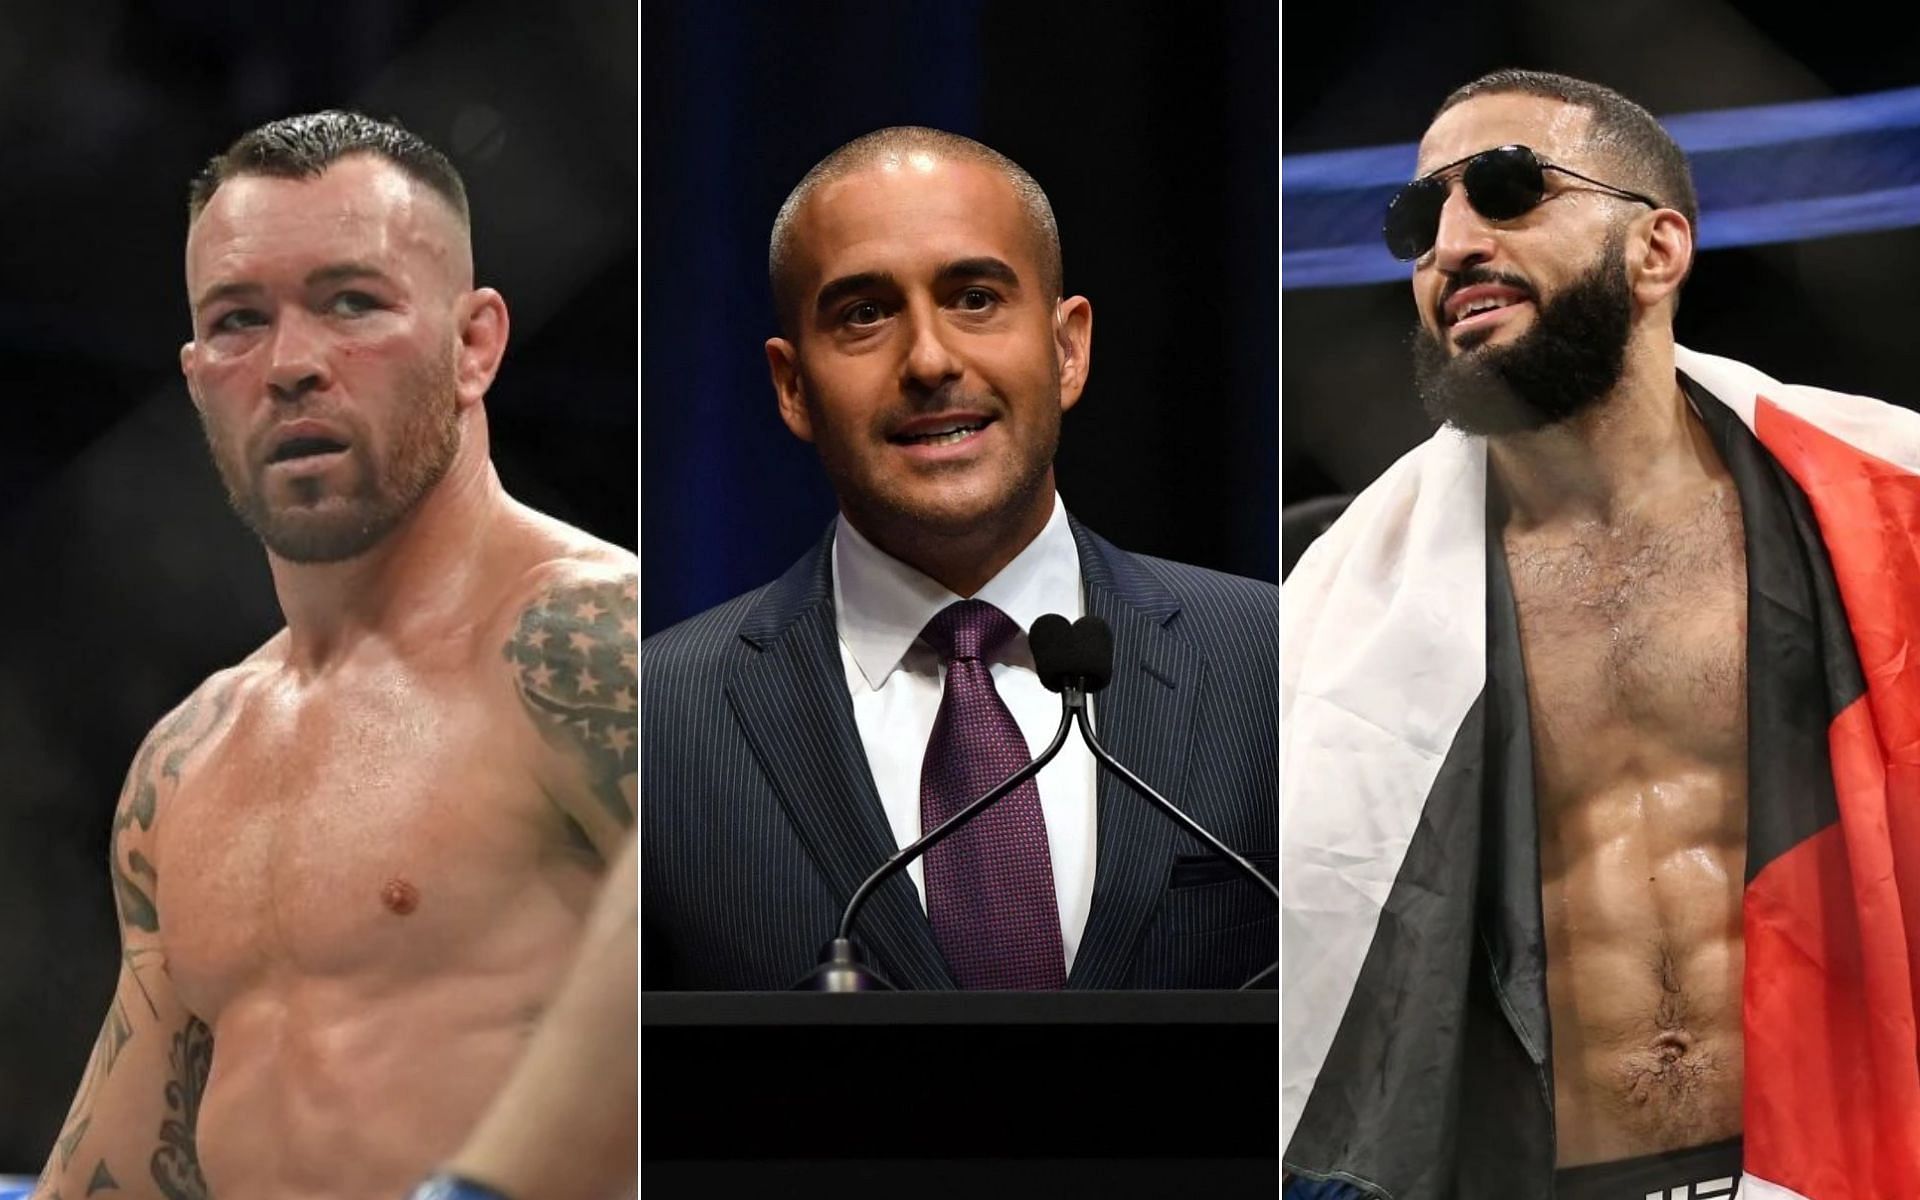 Colby Covington [Left], Jon Anik [Middle], and Belal Muhammad [Right]